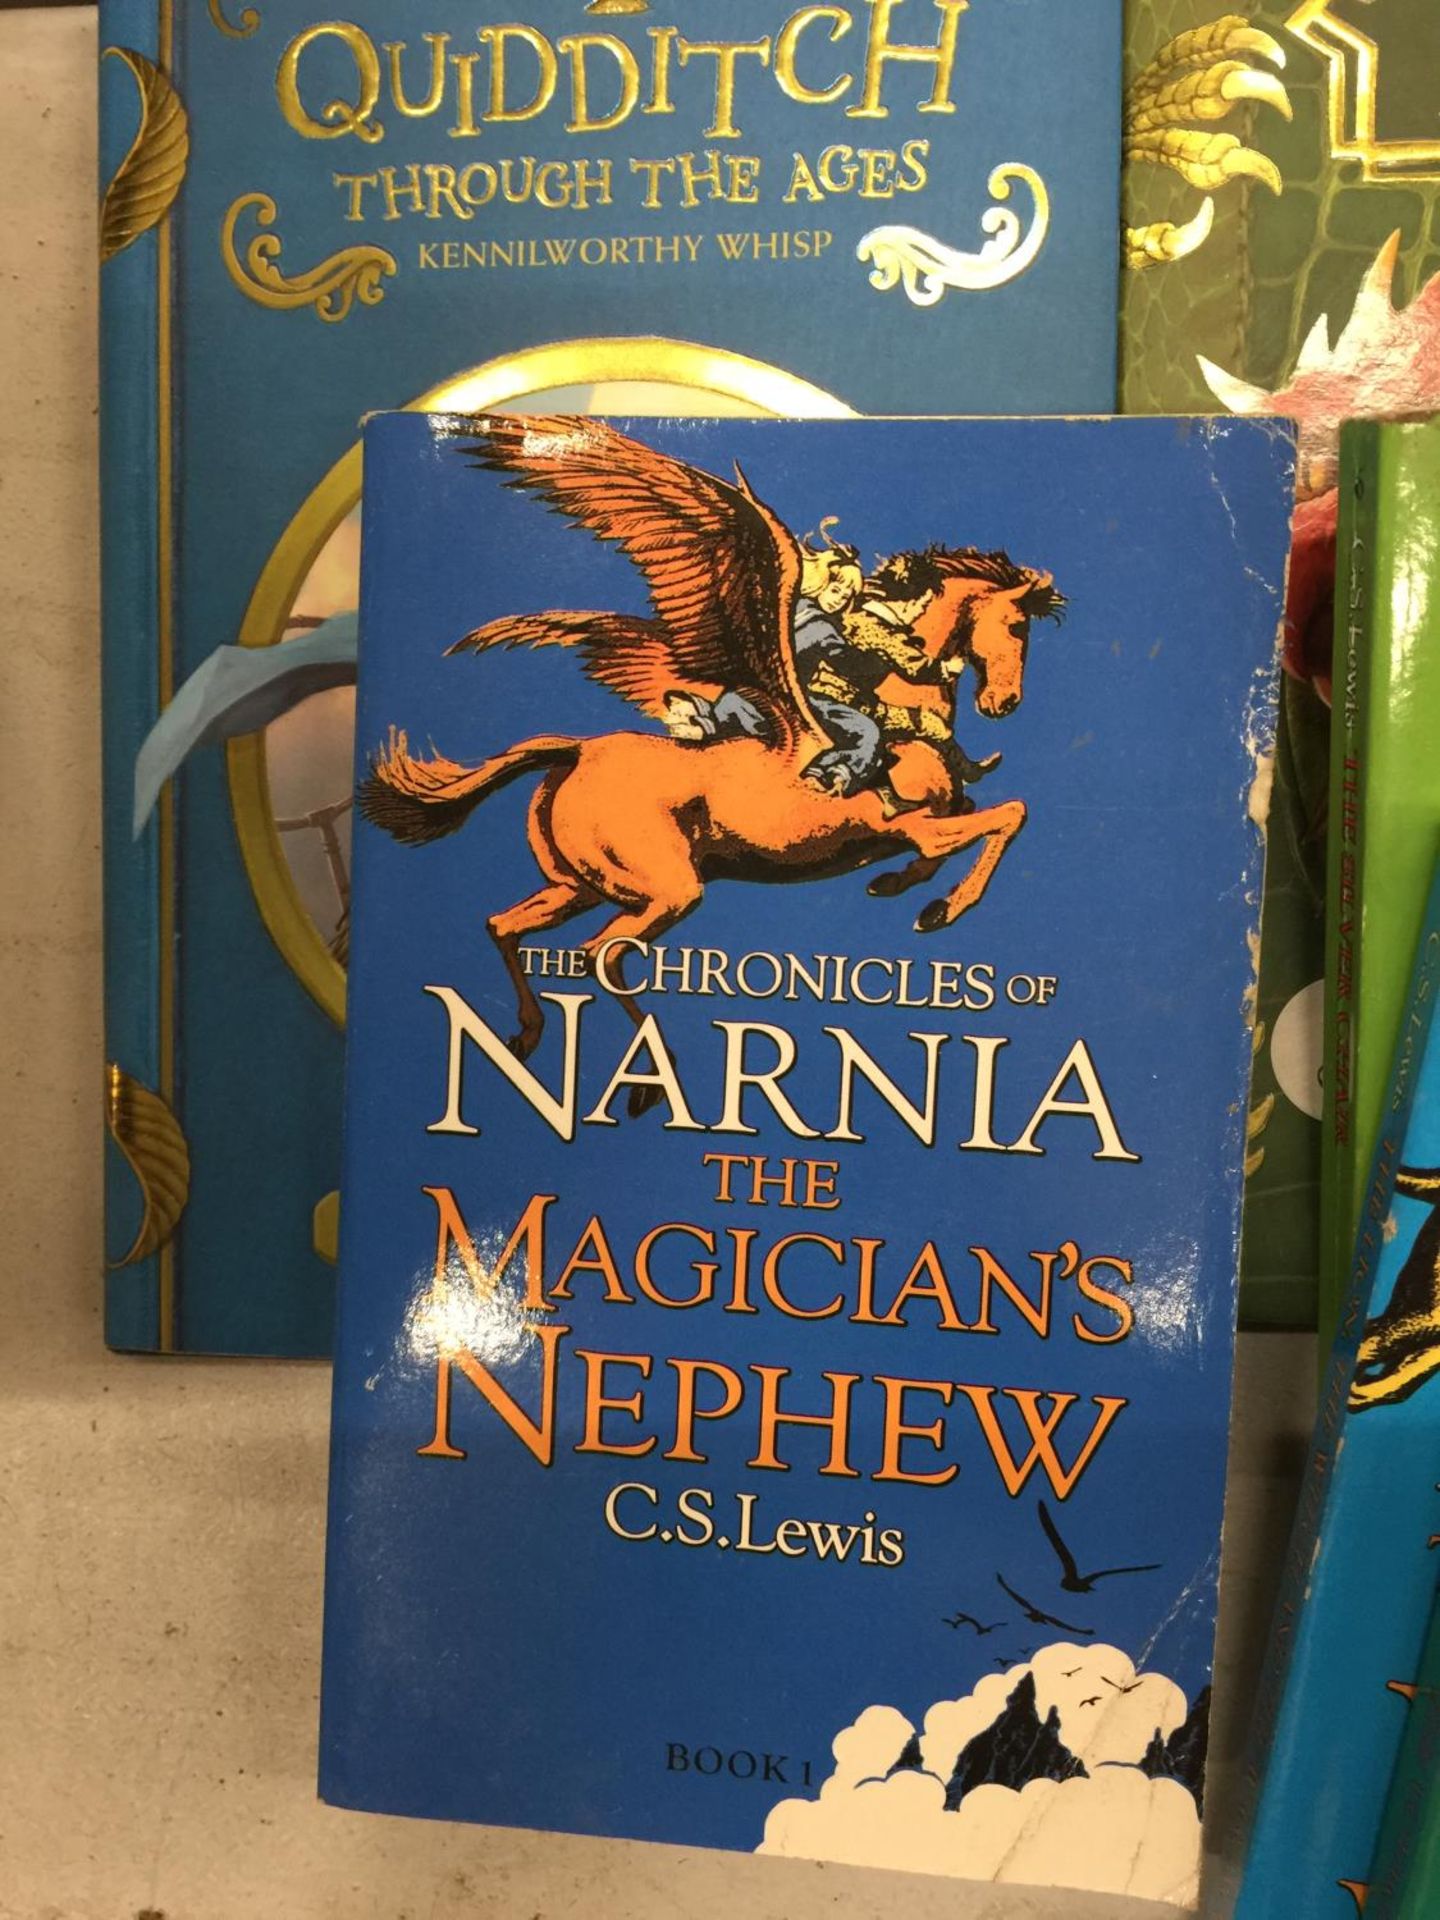 FIVE C. S. LEWIS CHRONICLES OF NARNIA PAPERBACKS PLUS TWO J. K. ROWLING BOOKS - Image 4 of 6